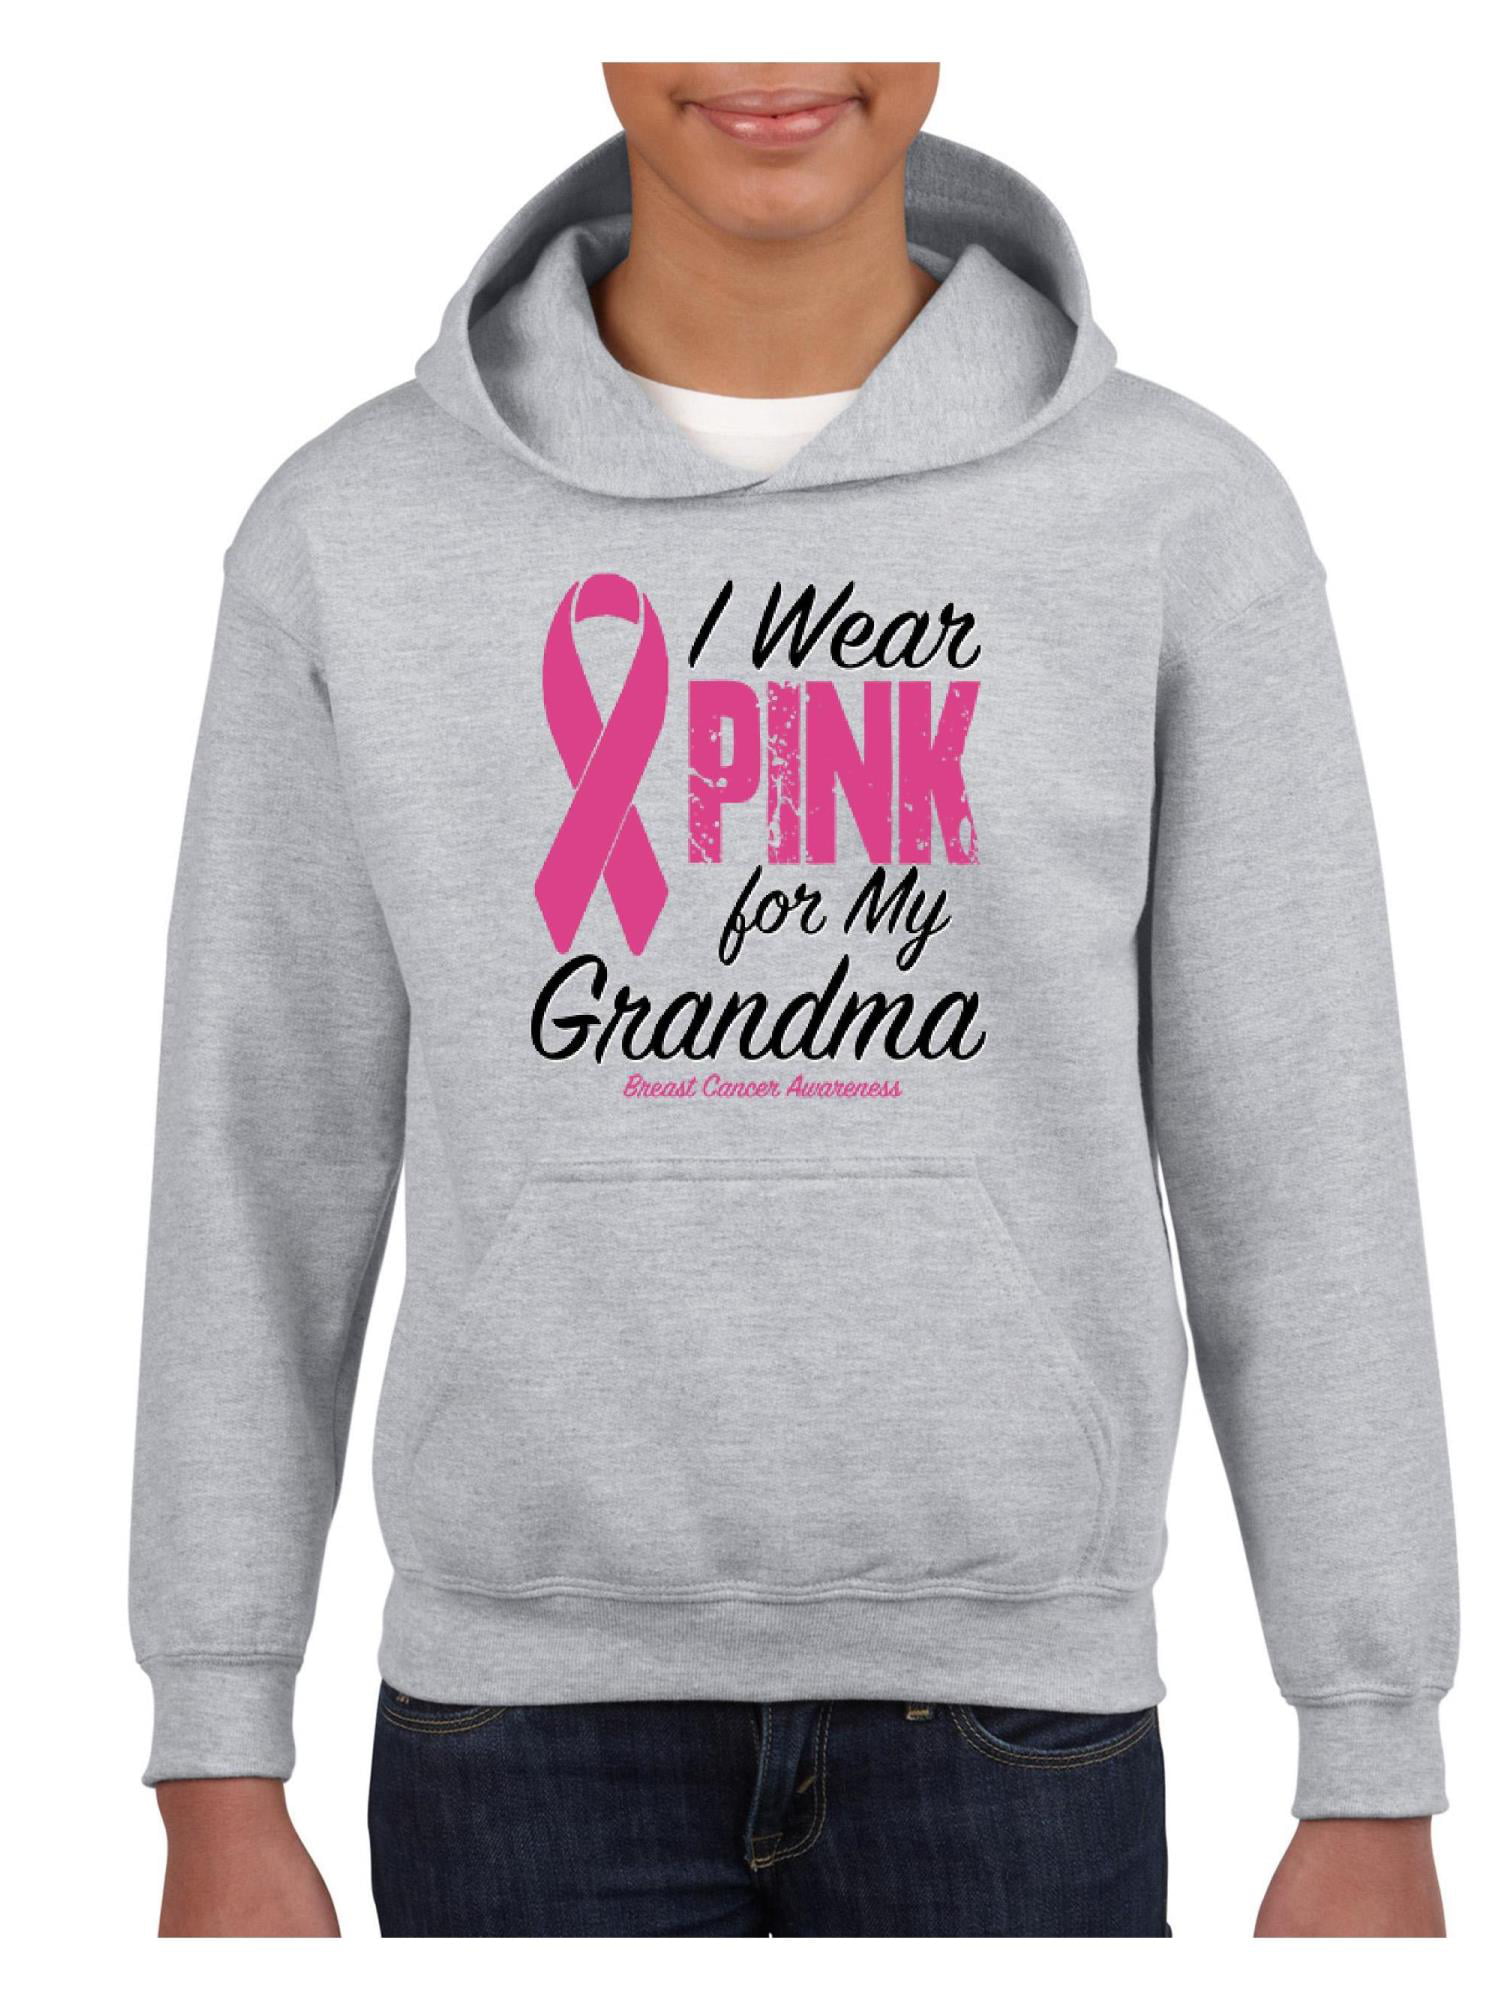 Cancer Awareness I Wear Pink for My Grandma Unisex Hoodie For Girls and Boys Youth Sweatshirt